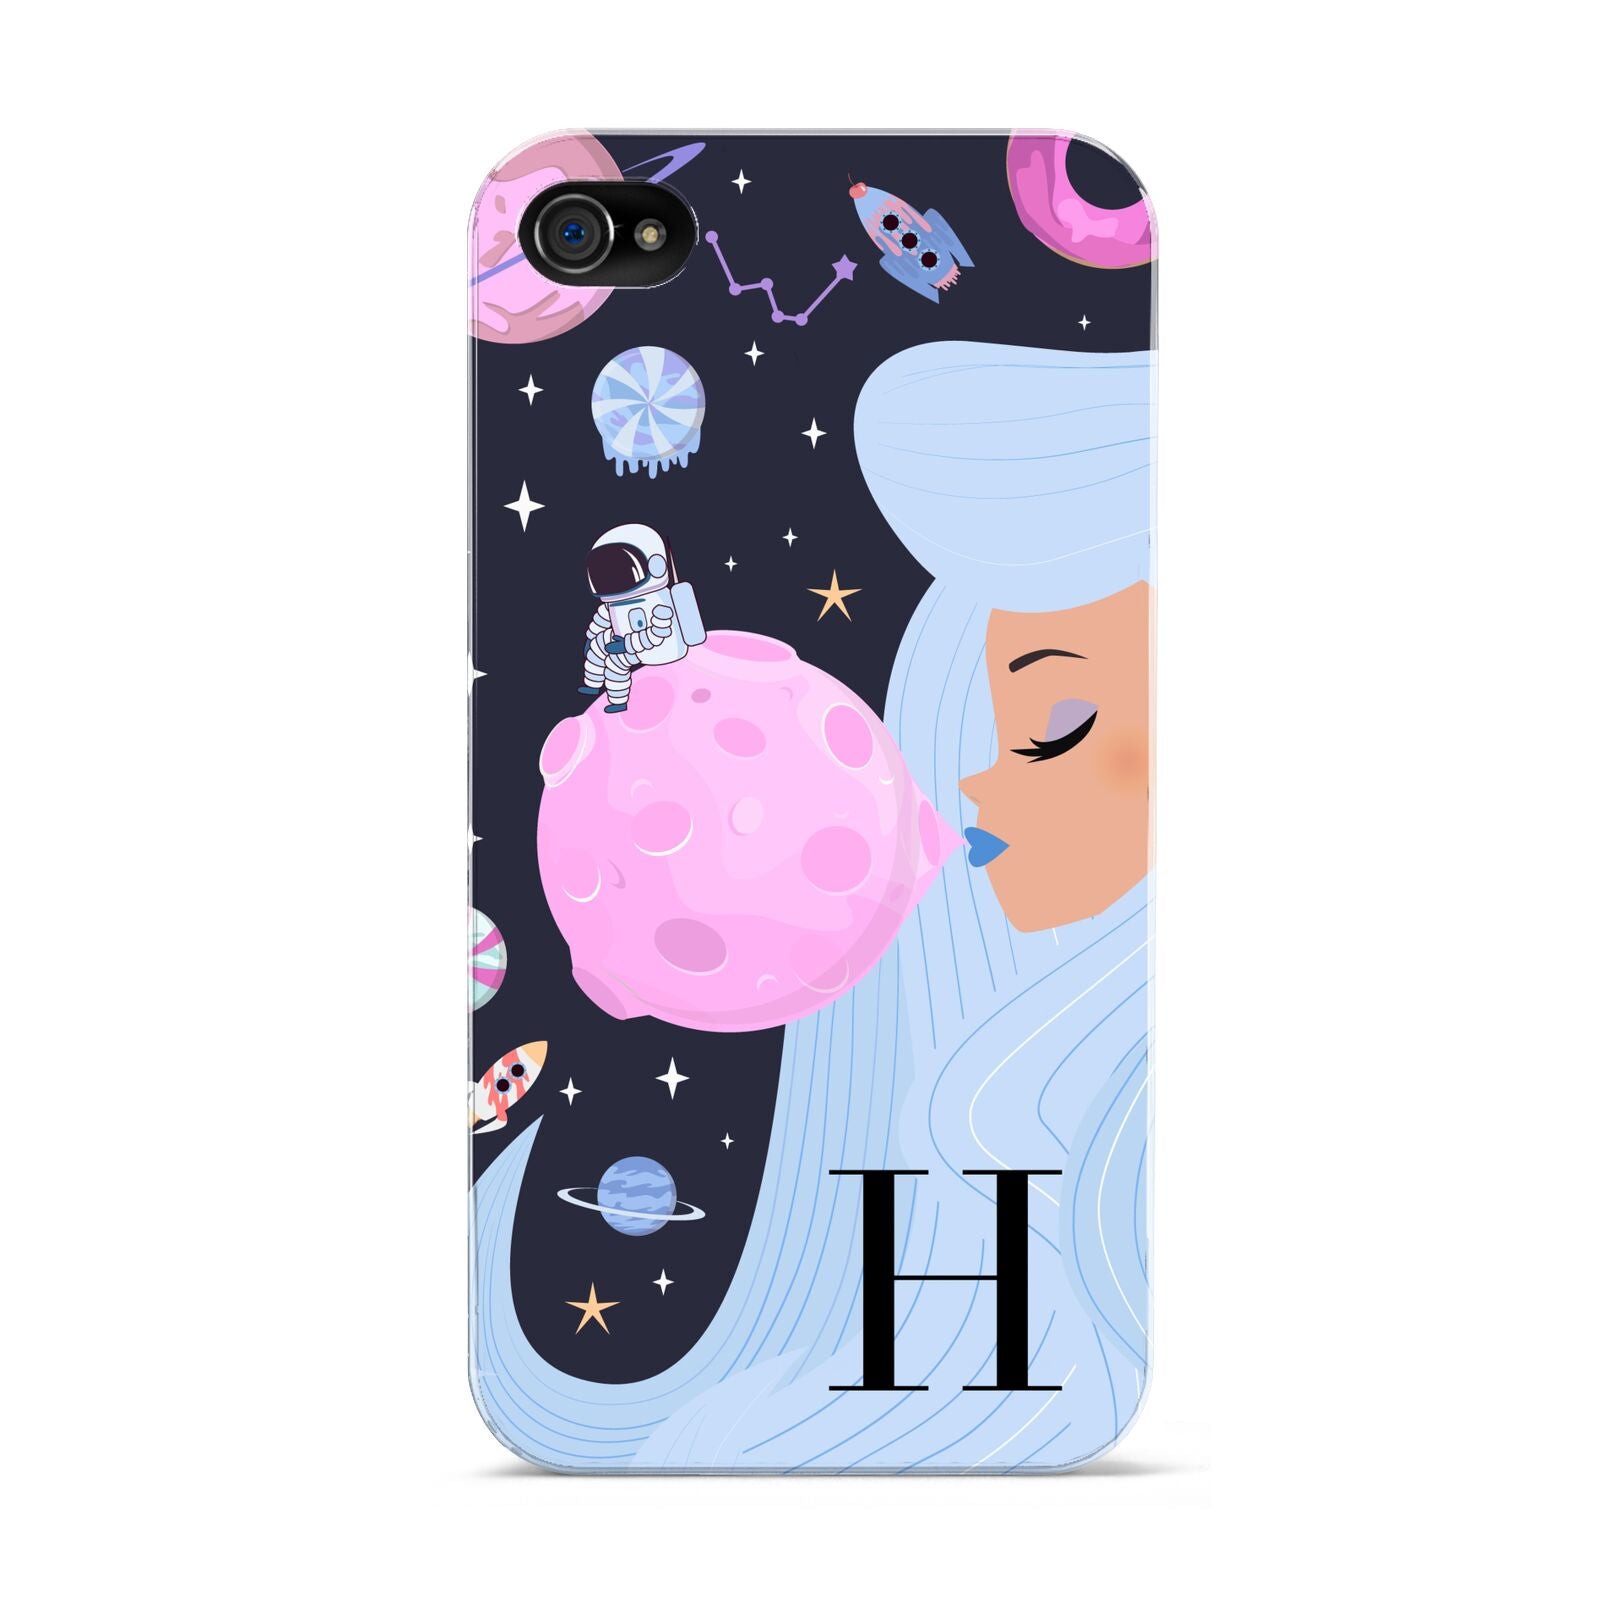 Ethereal Goddess in Space with Initial Apple iPhone 4s Case